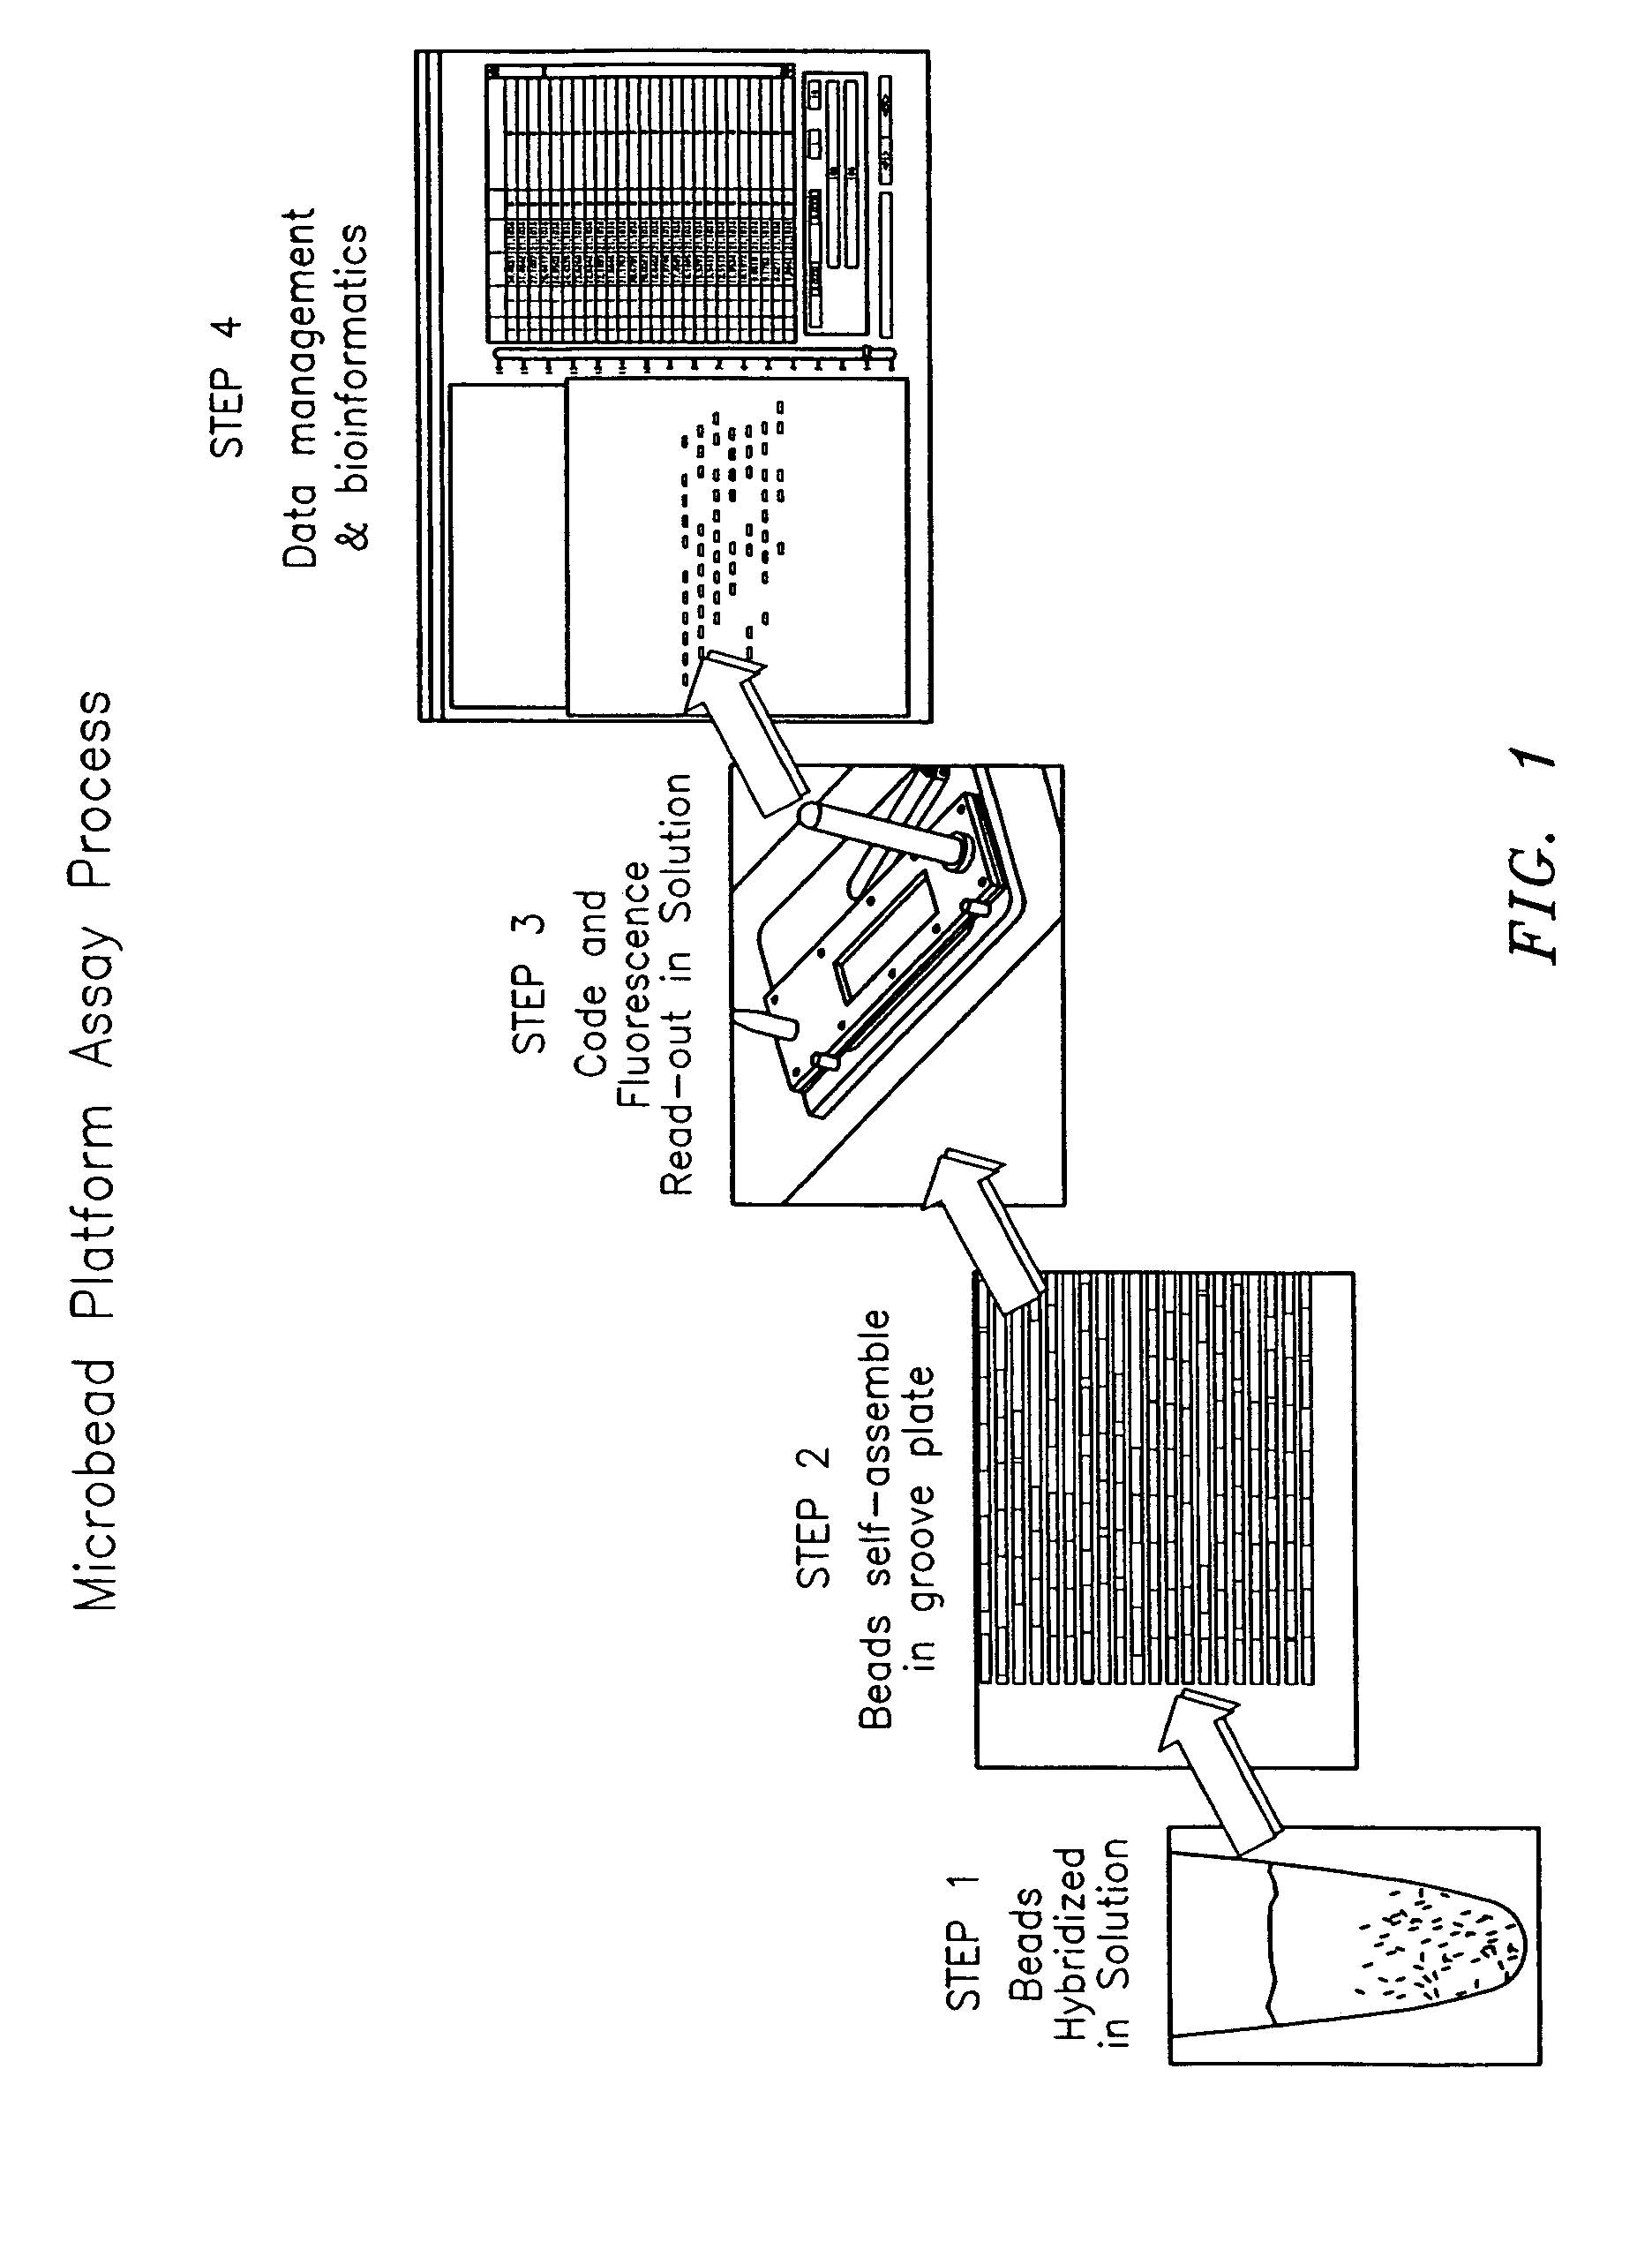 Method and apparatus for aligning microbeads in order to interrogate the same